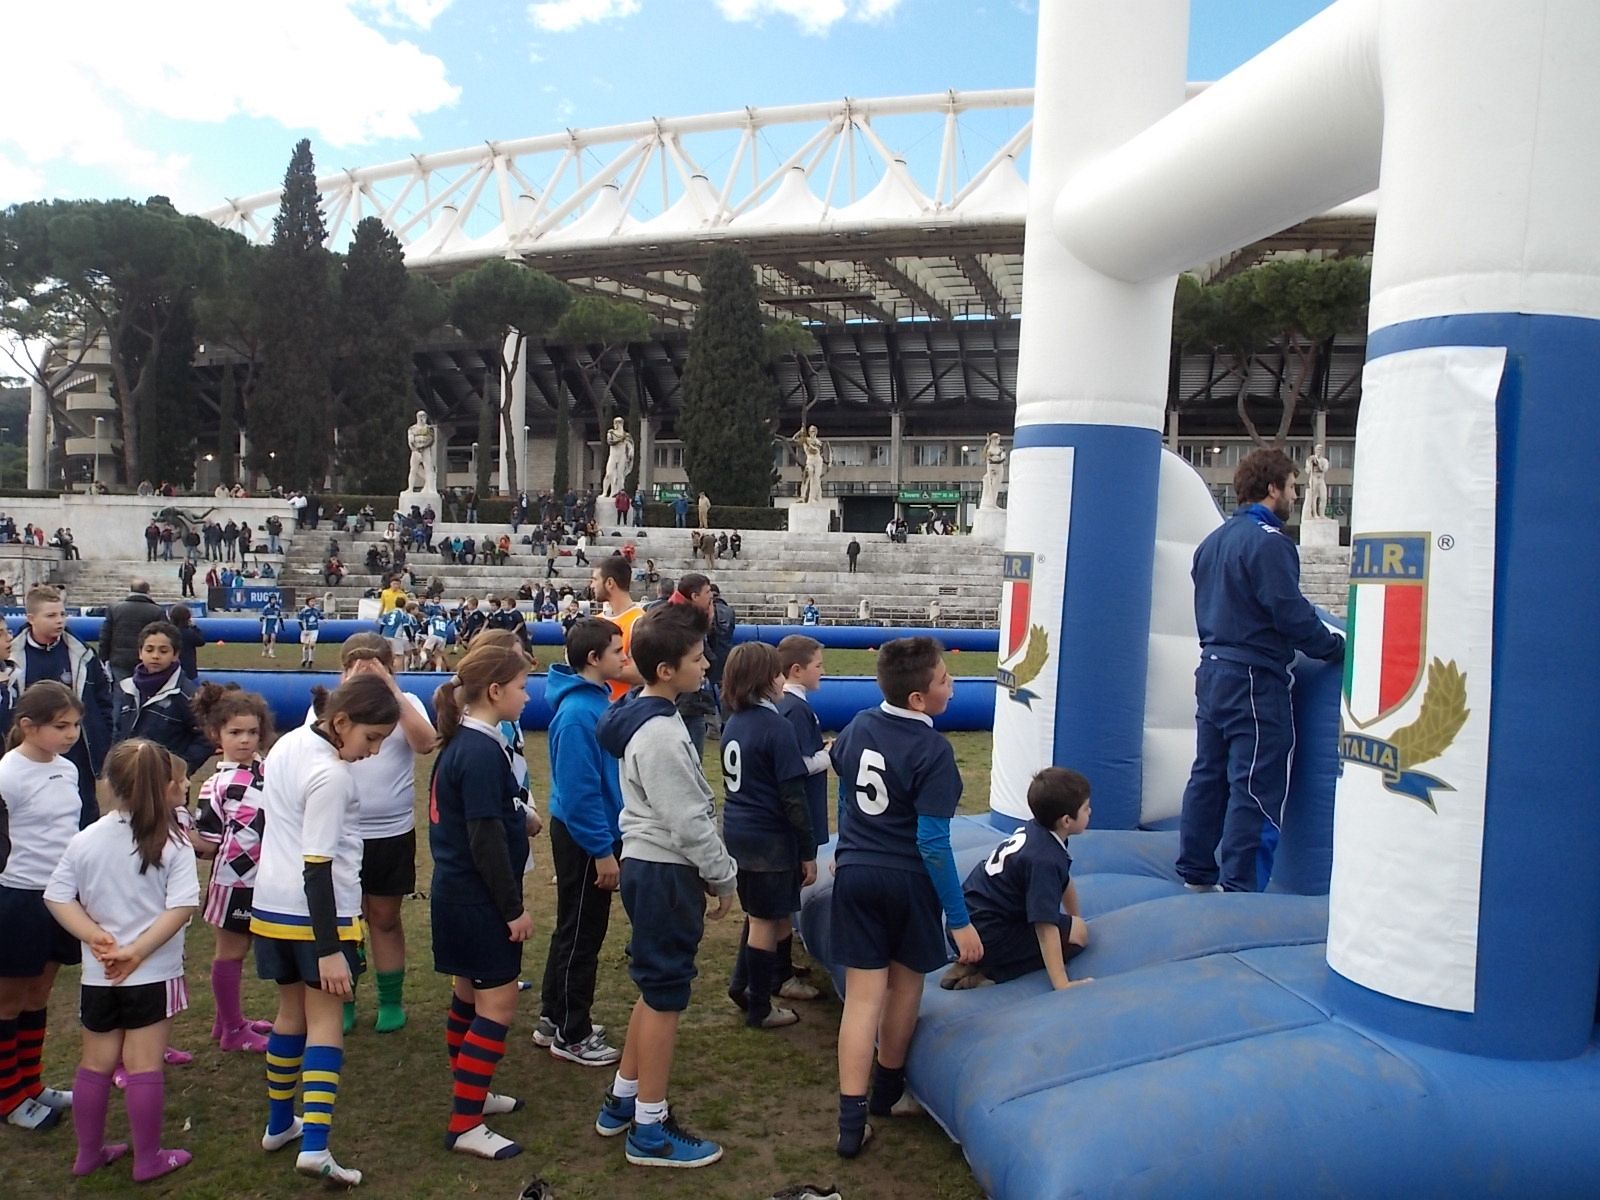 gonfiabile gioco rugby, gonfiabile gioco rugby produzione, gonfiabile gioco rugby prezzo, gonfiabile gioco rugby noleggio, bungee rugby, attivit&#224; rugby, campo rugby gonfiabile, gioco rugby elastici, evento rugby, team building rugby